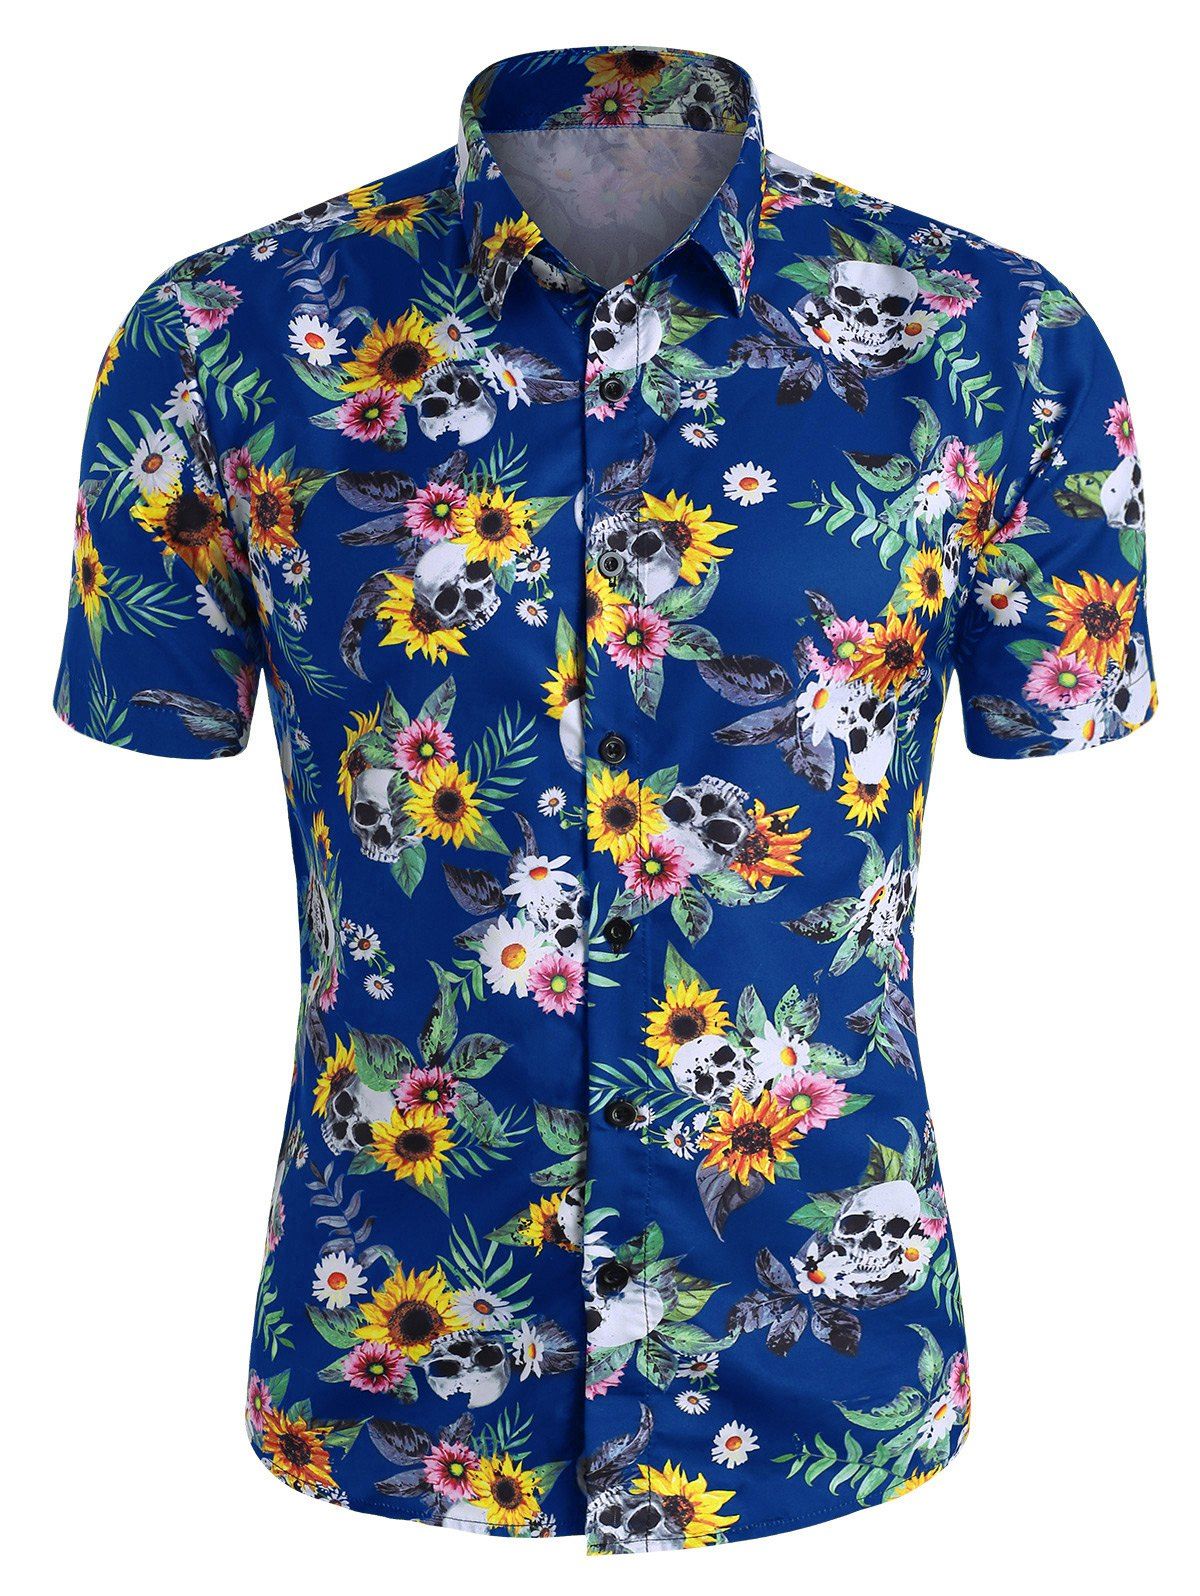 [36% OFF] 2020 Skull Ditsy Floral Button Up Casual Shirt In BLUE